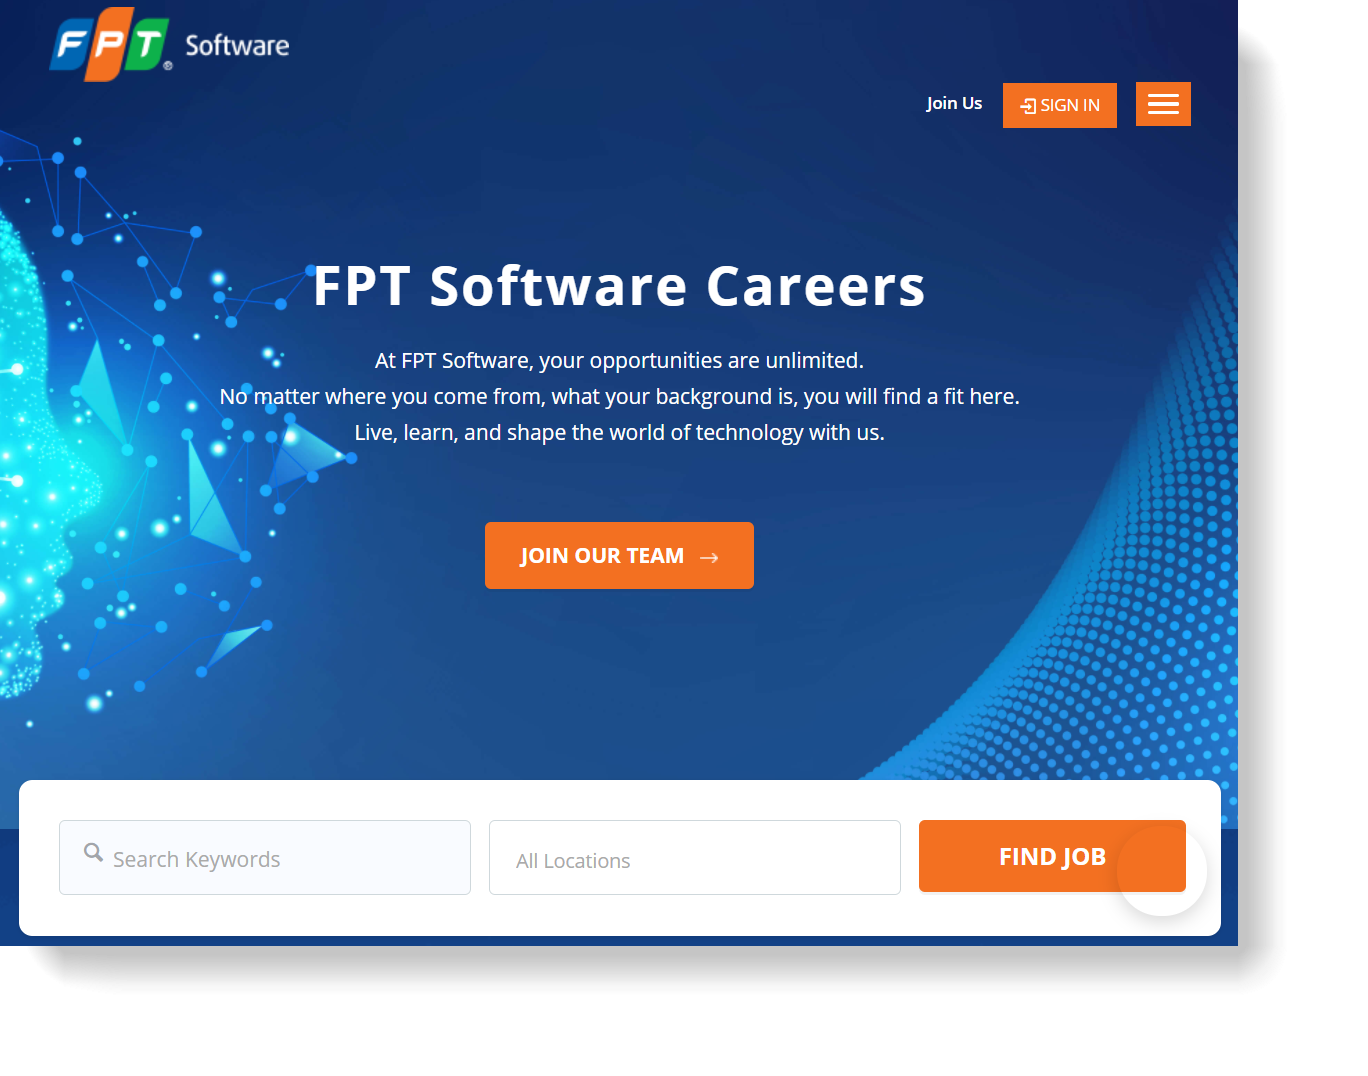 fpt-software-company-career-site